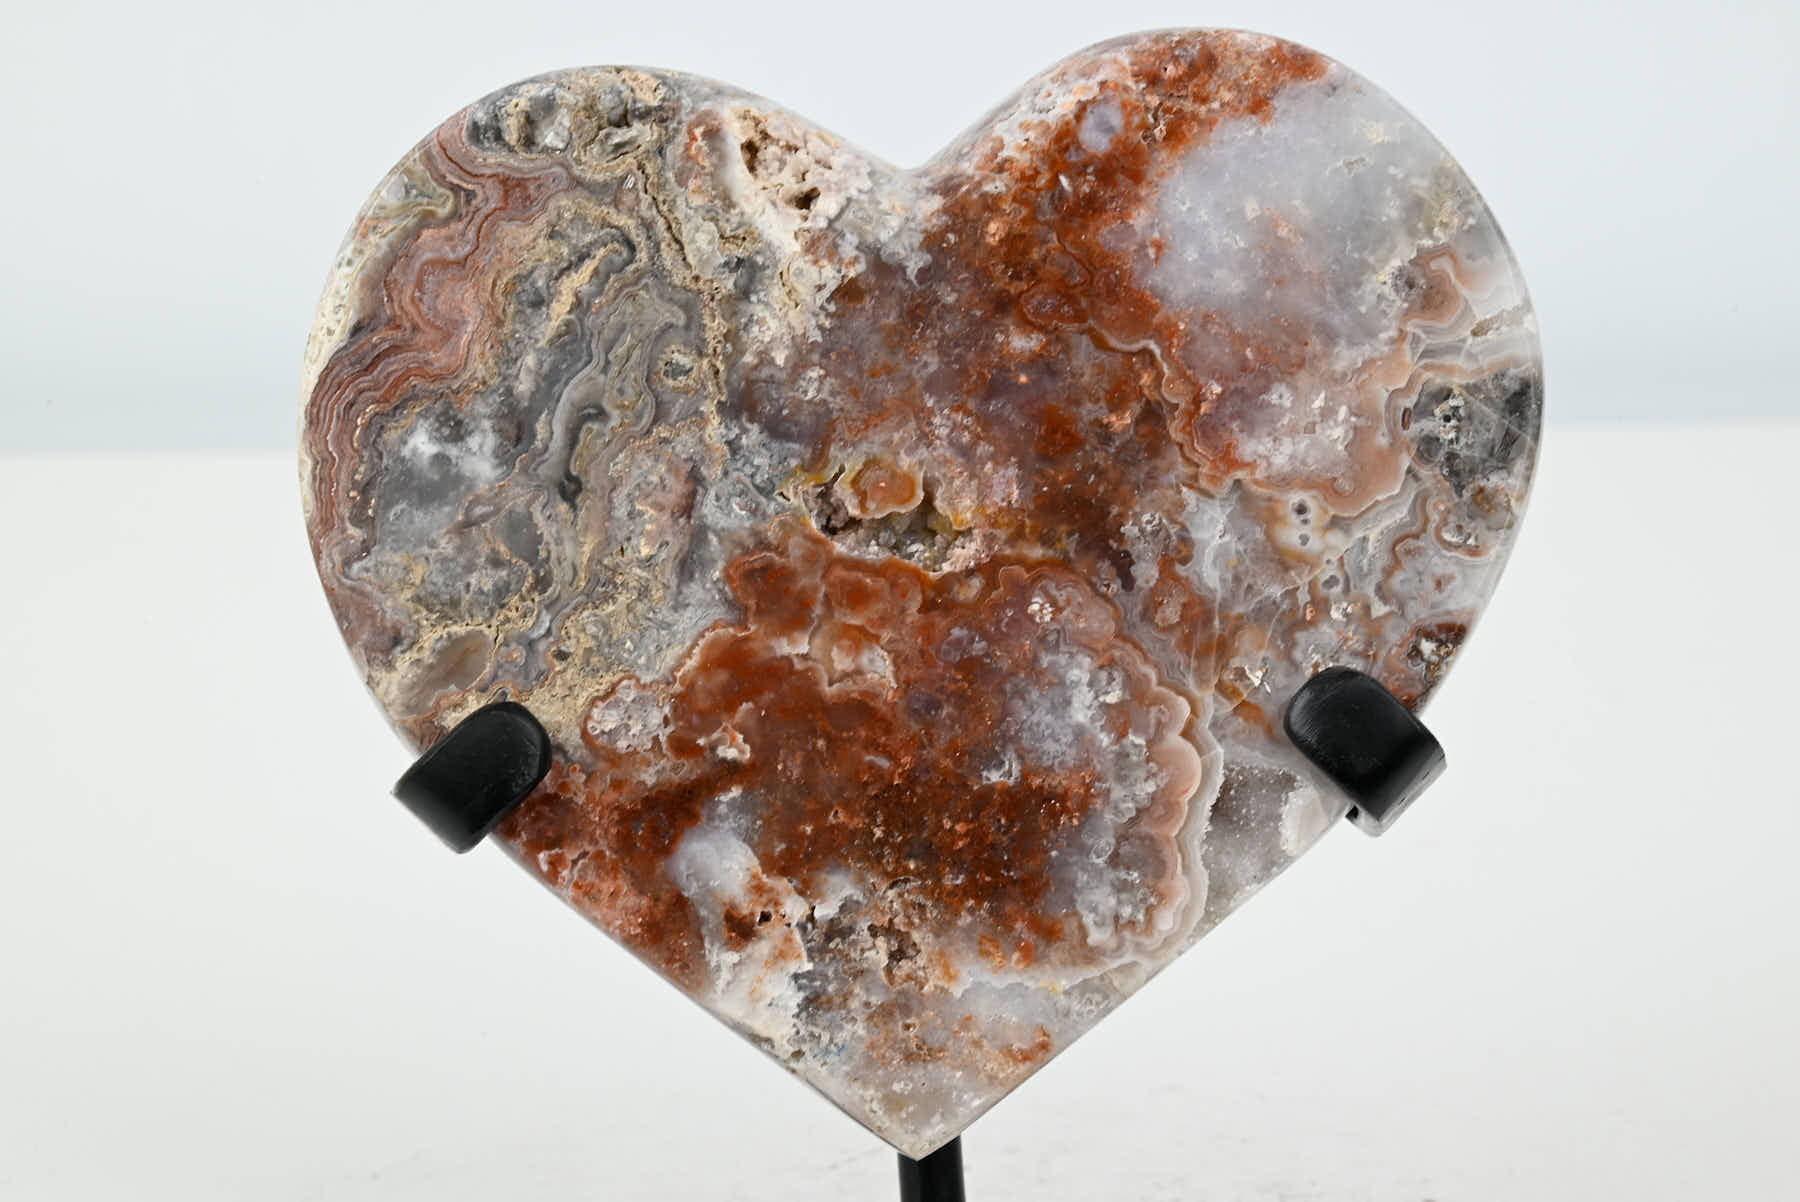 Extra Quality Pink Amethyst Heart - 0.65kg, 13cm high - #HTPINK-34001